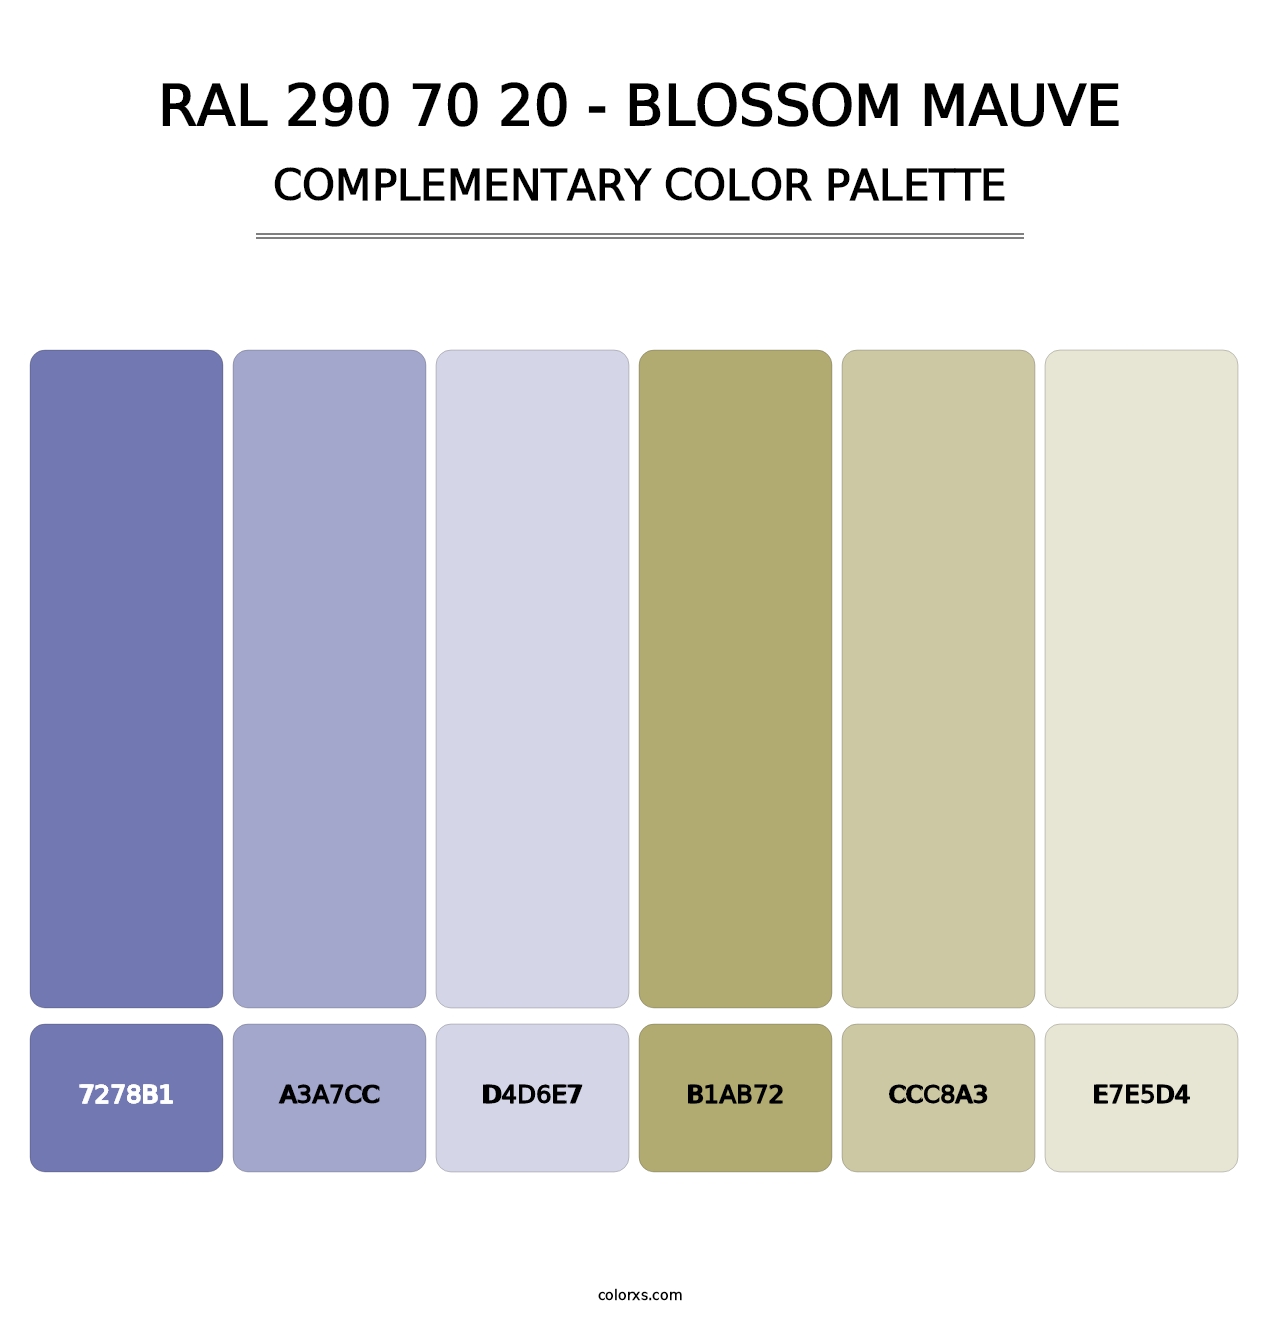 RAL 290 70 20 - Blossom Mauve - Complementary Color Palette